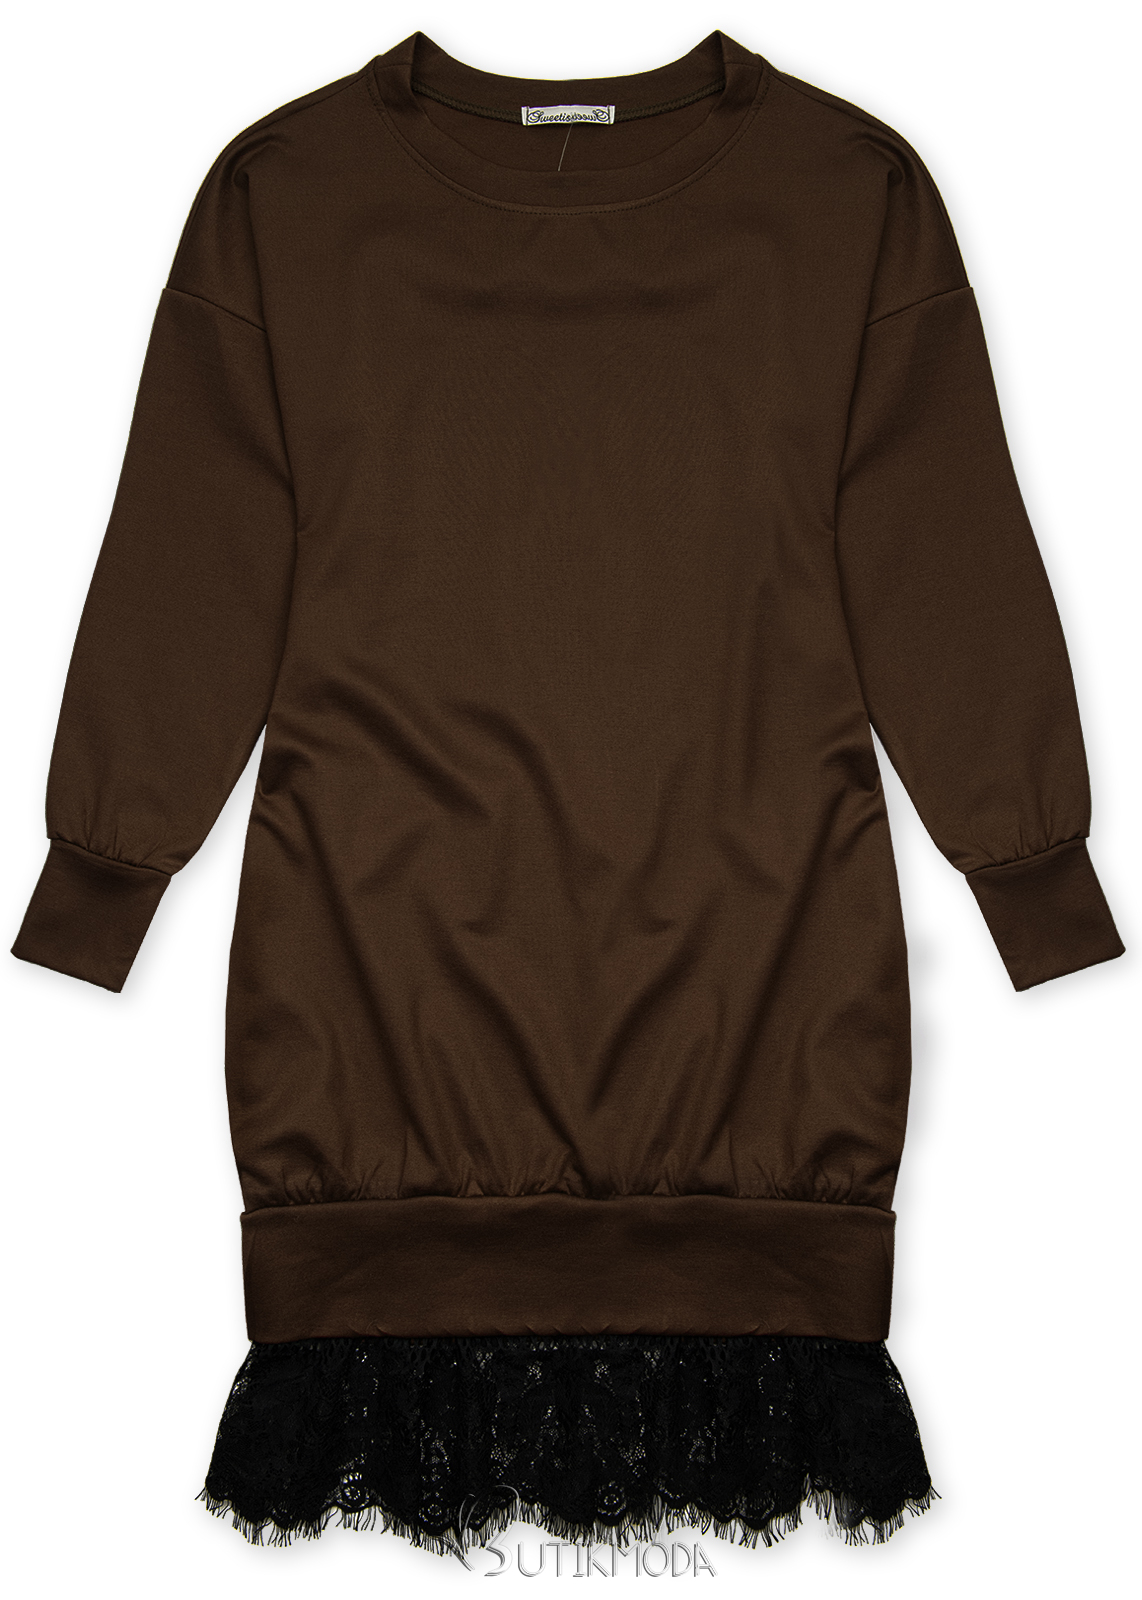 Brown sweatshirt dress with lace